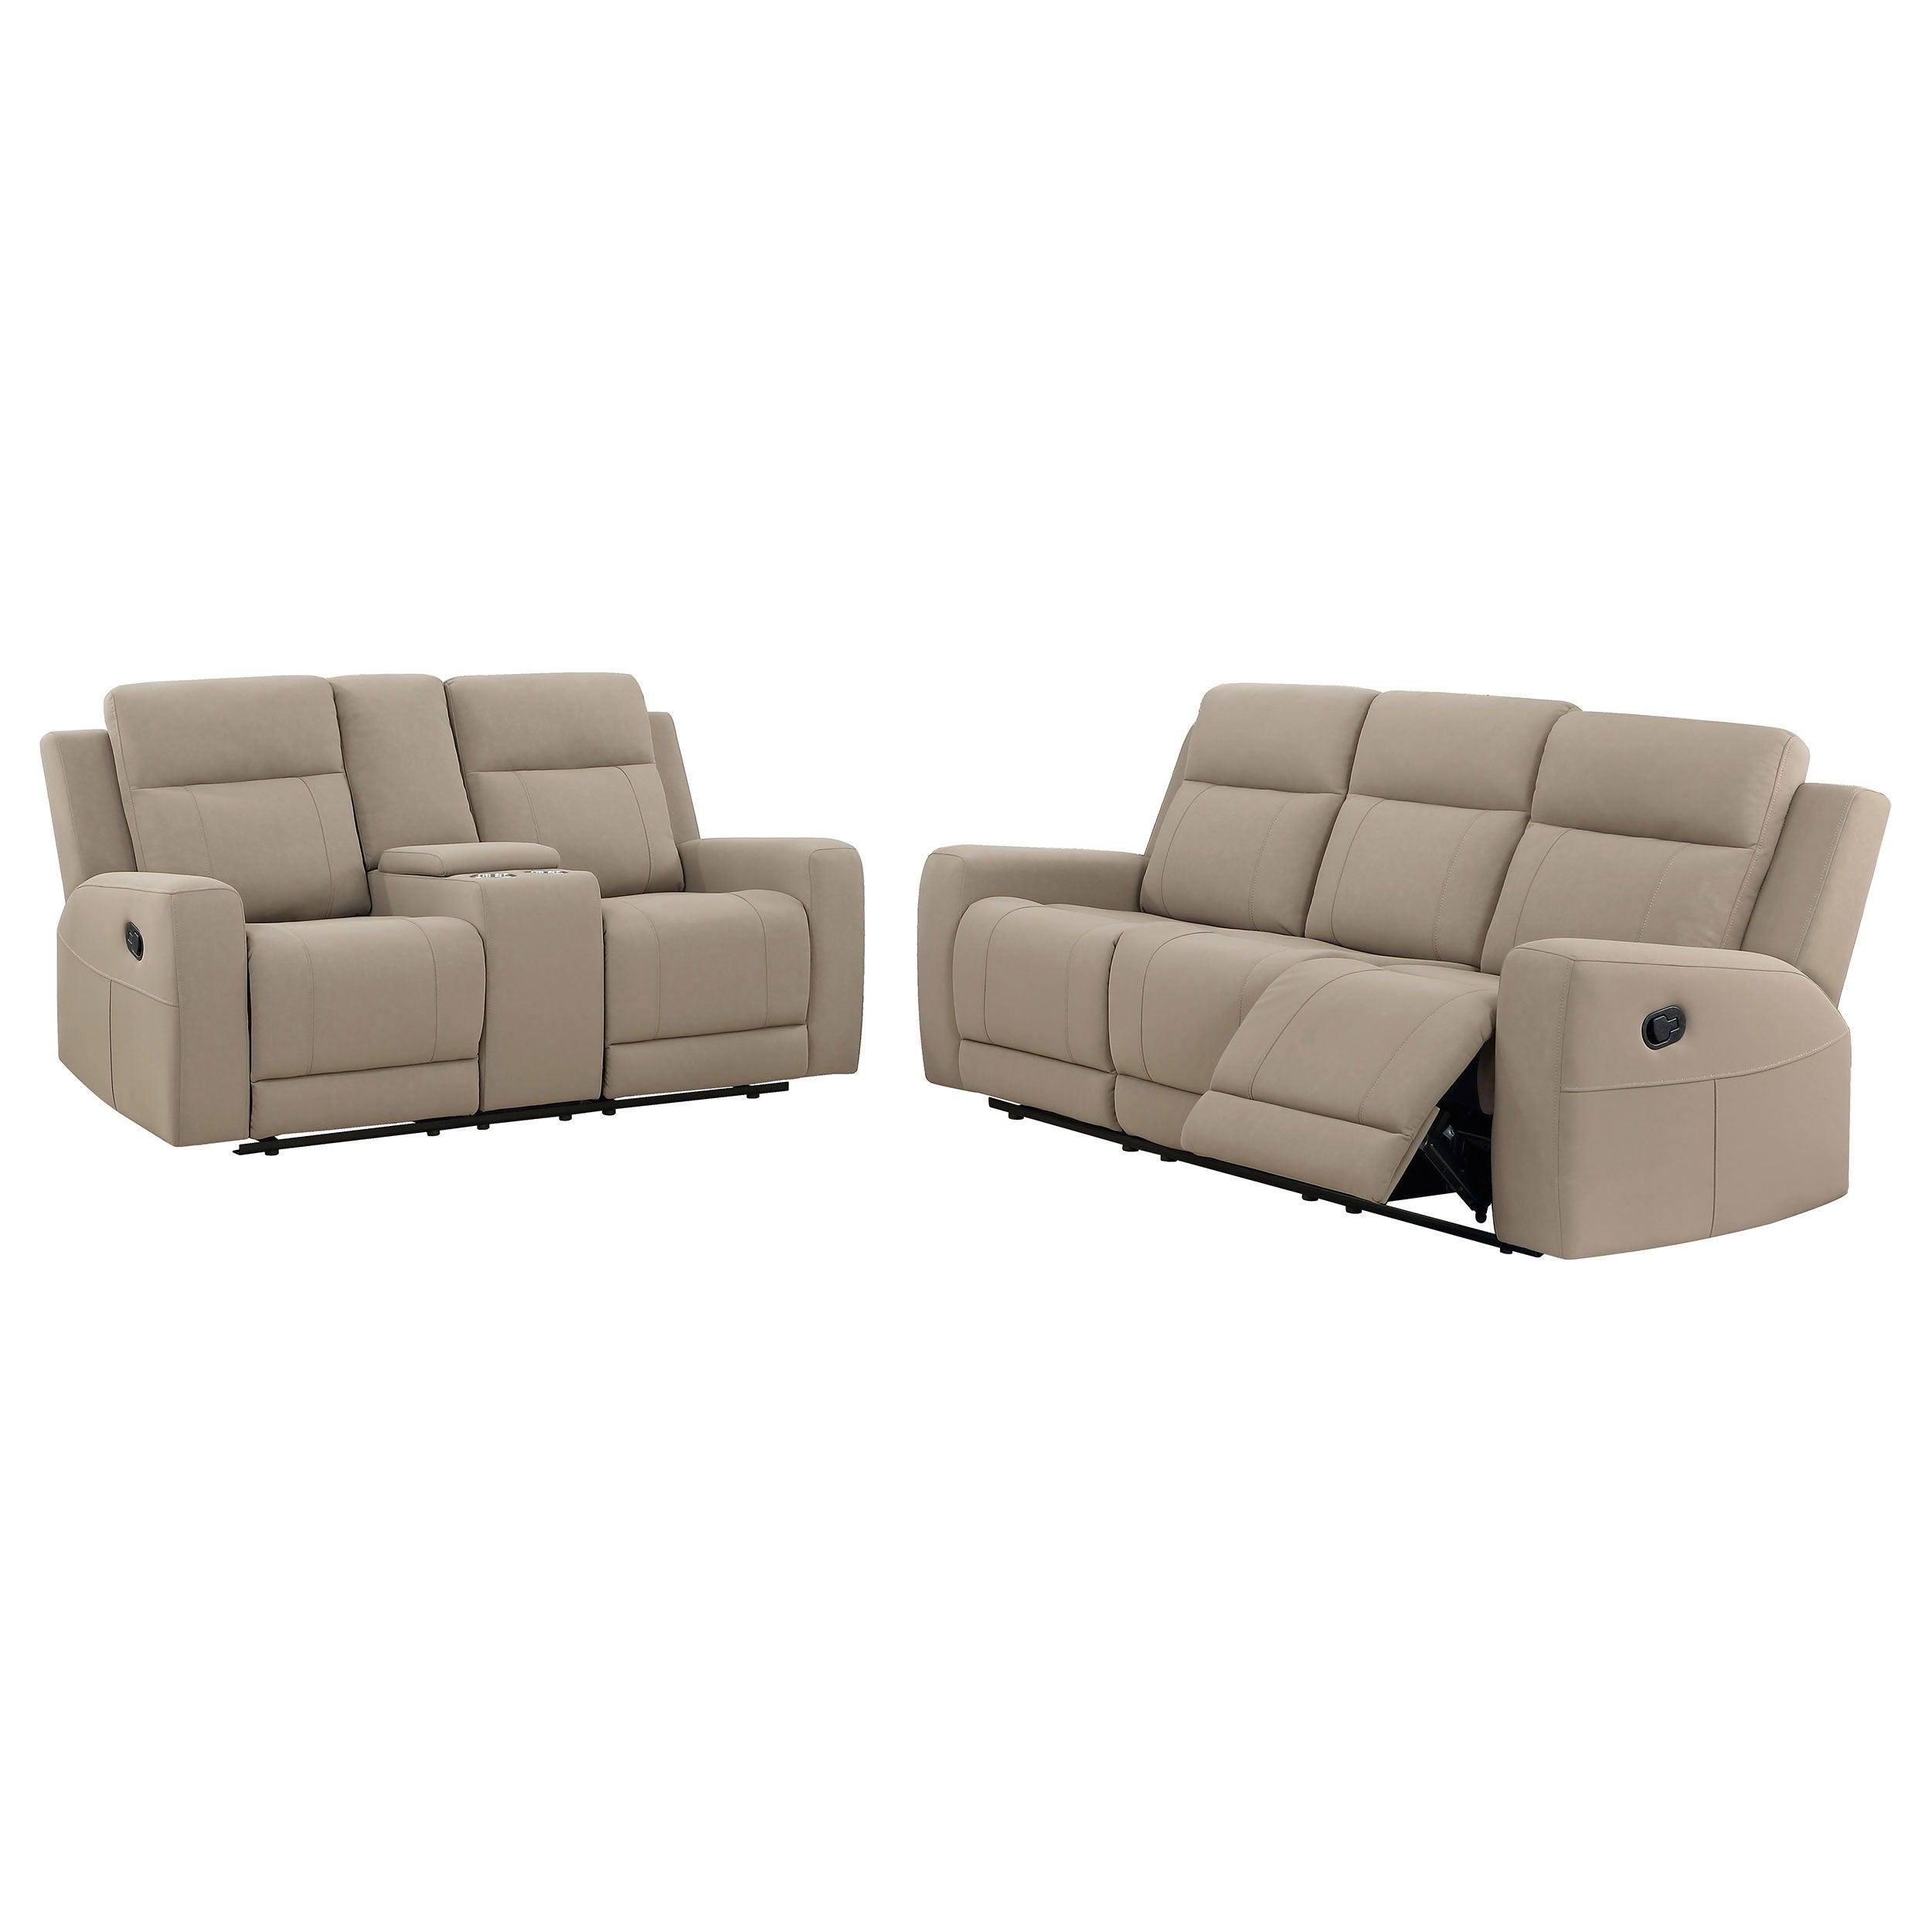 Coaster Fine Furniture - Brentwood - Upholstered Motion Reclining Sofa Set - 5th Avenue Furniture